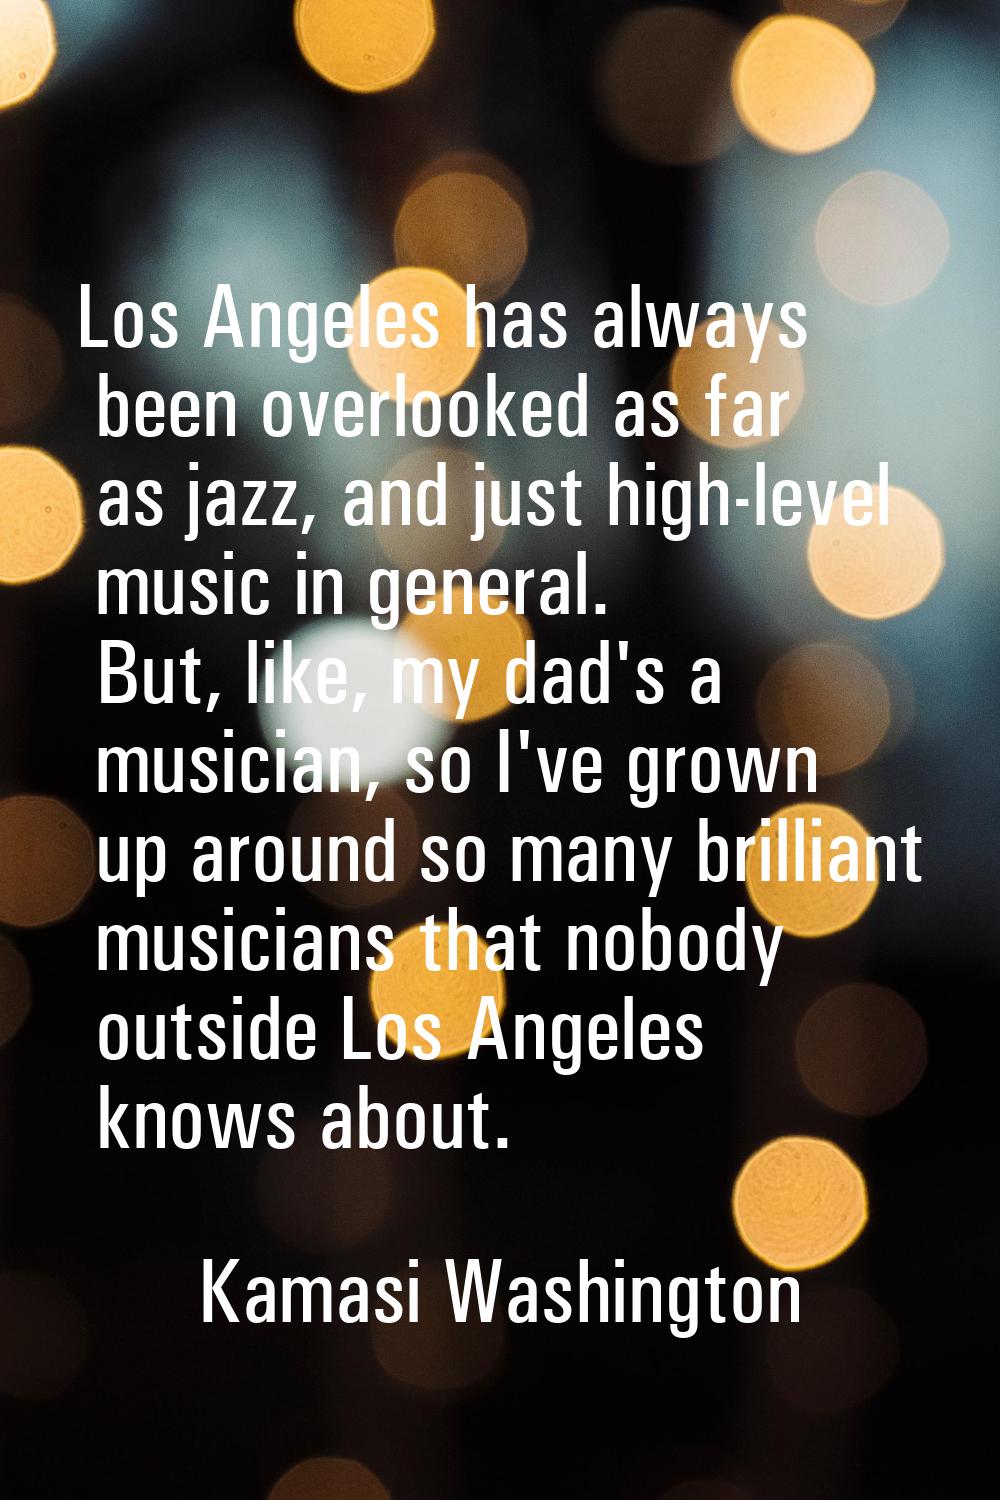 Los Angeles has always been overlooked as far as jazz, and just high-level music in general. But, l